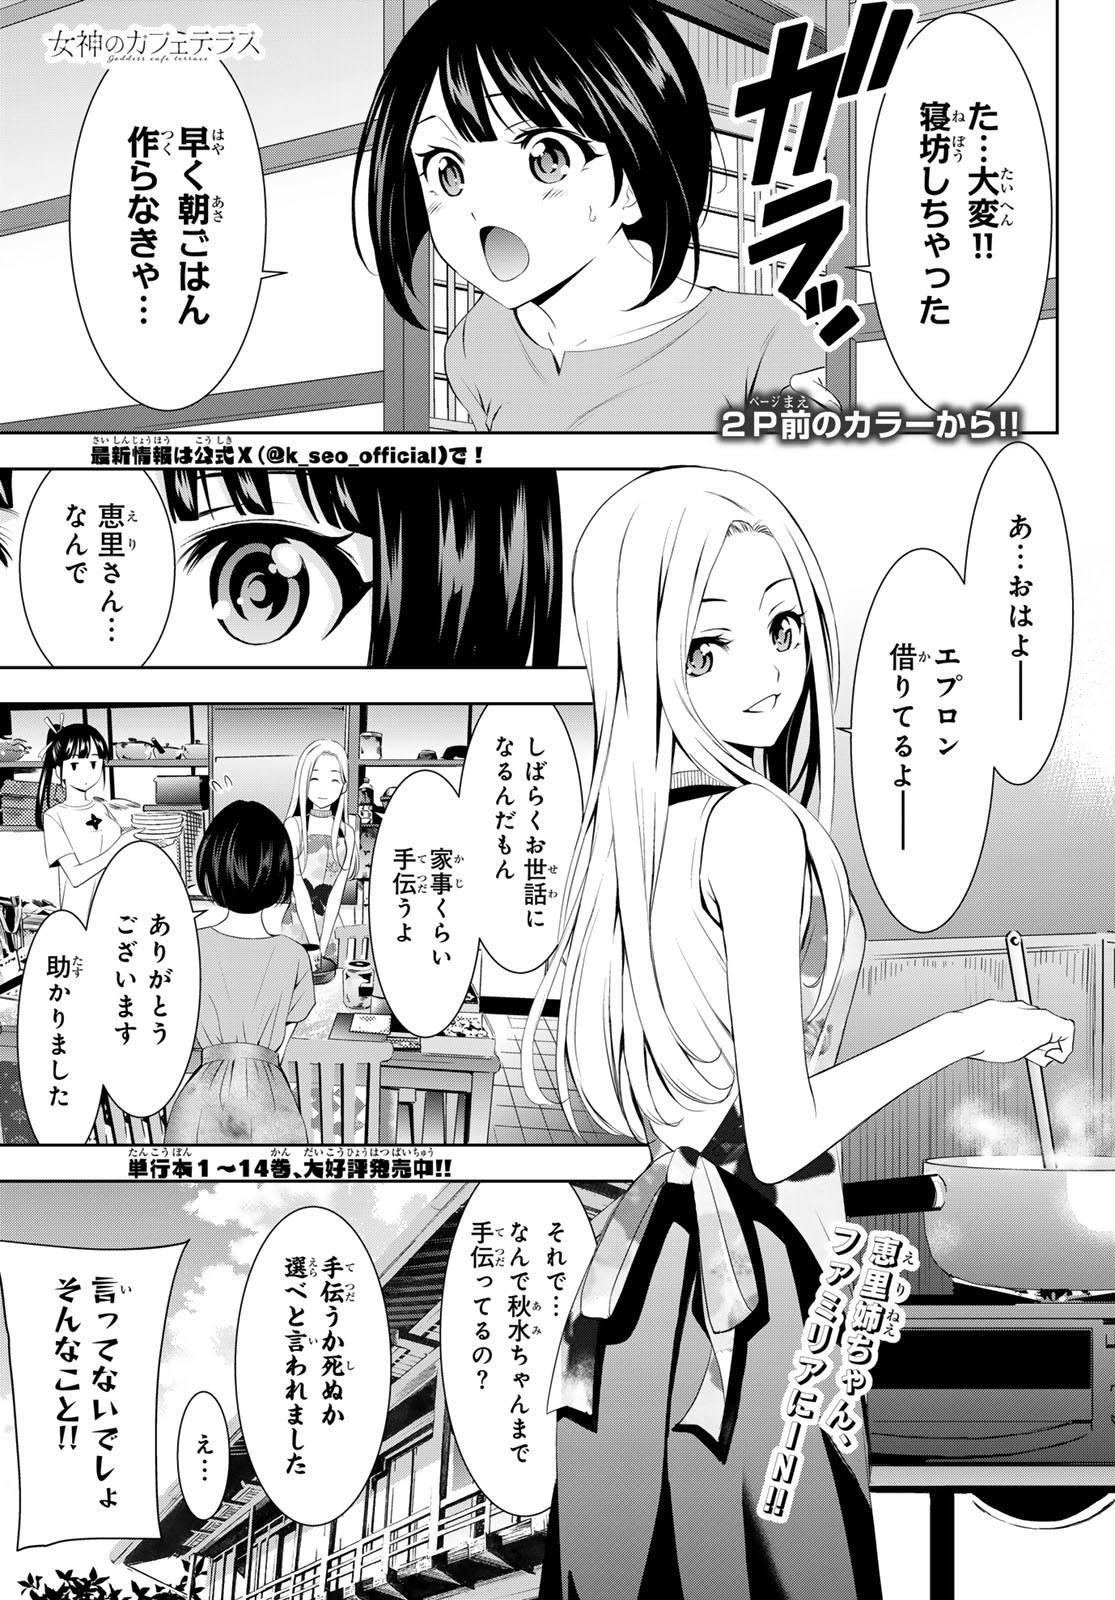 Goddess-Cafe-Terrace - Chapter 151 - Page 3